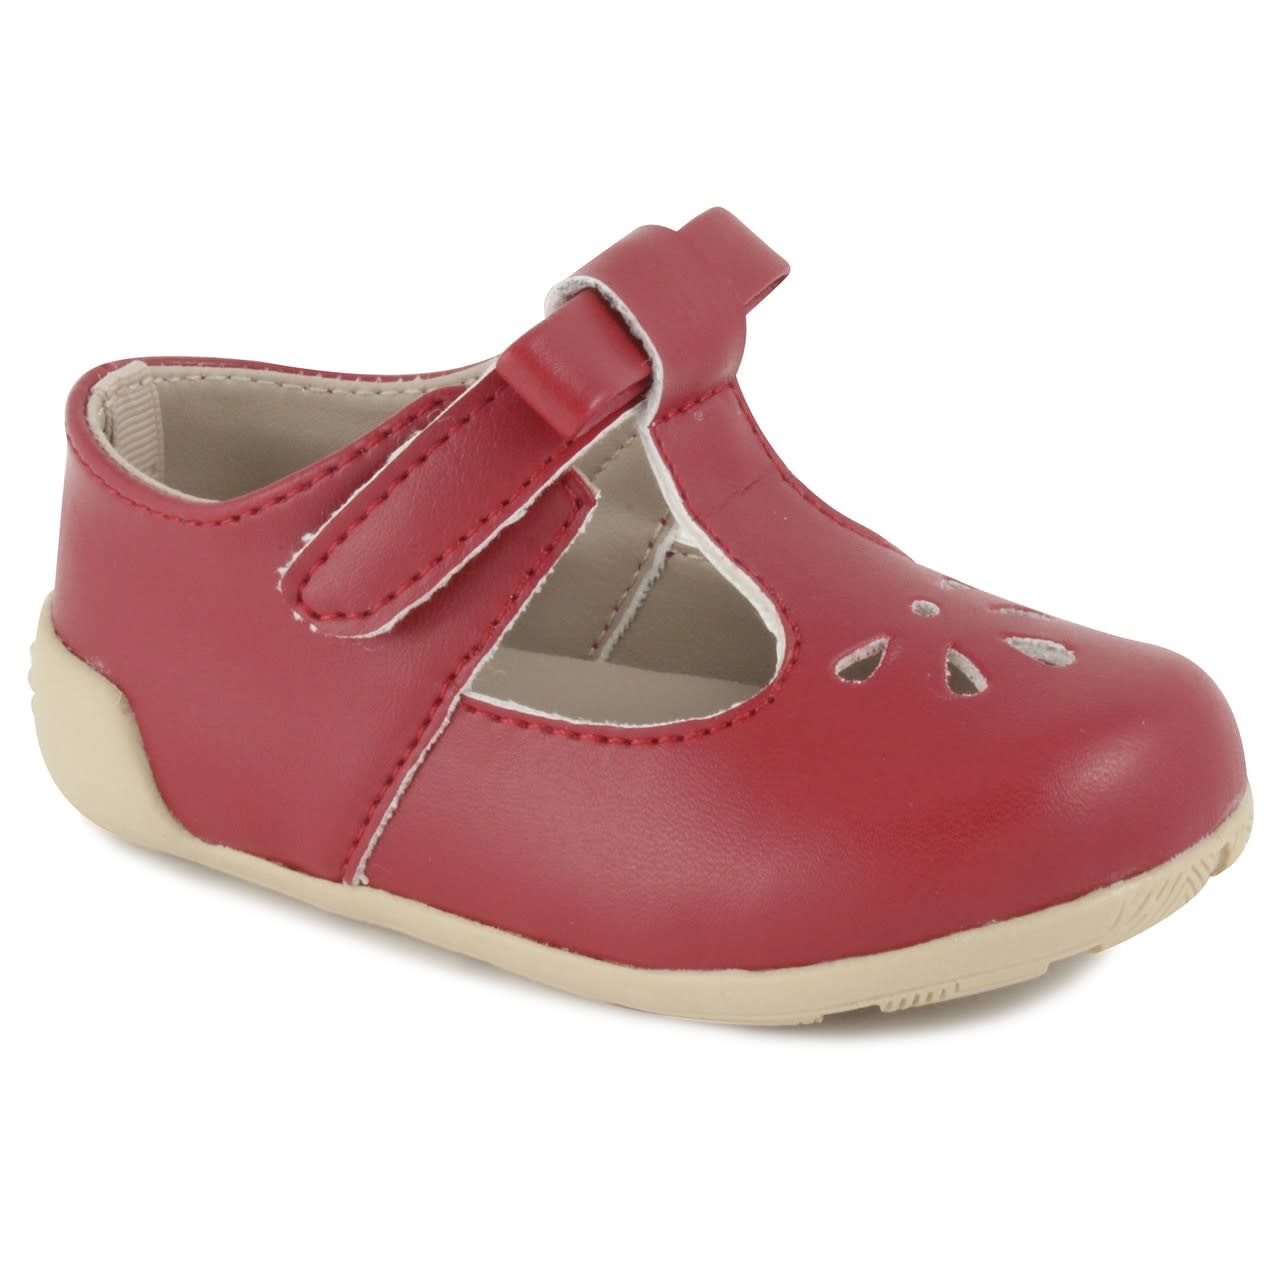 Baby Deer Girl's Mary Jane T-strap Shoe